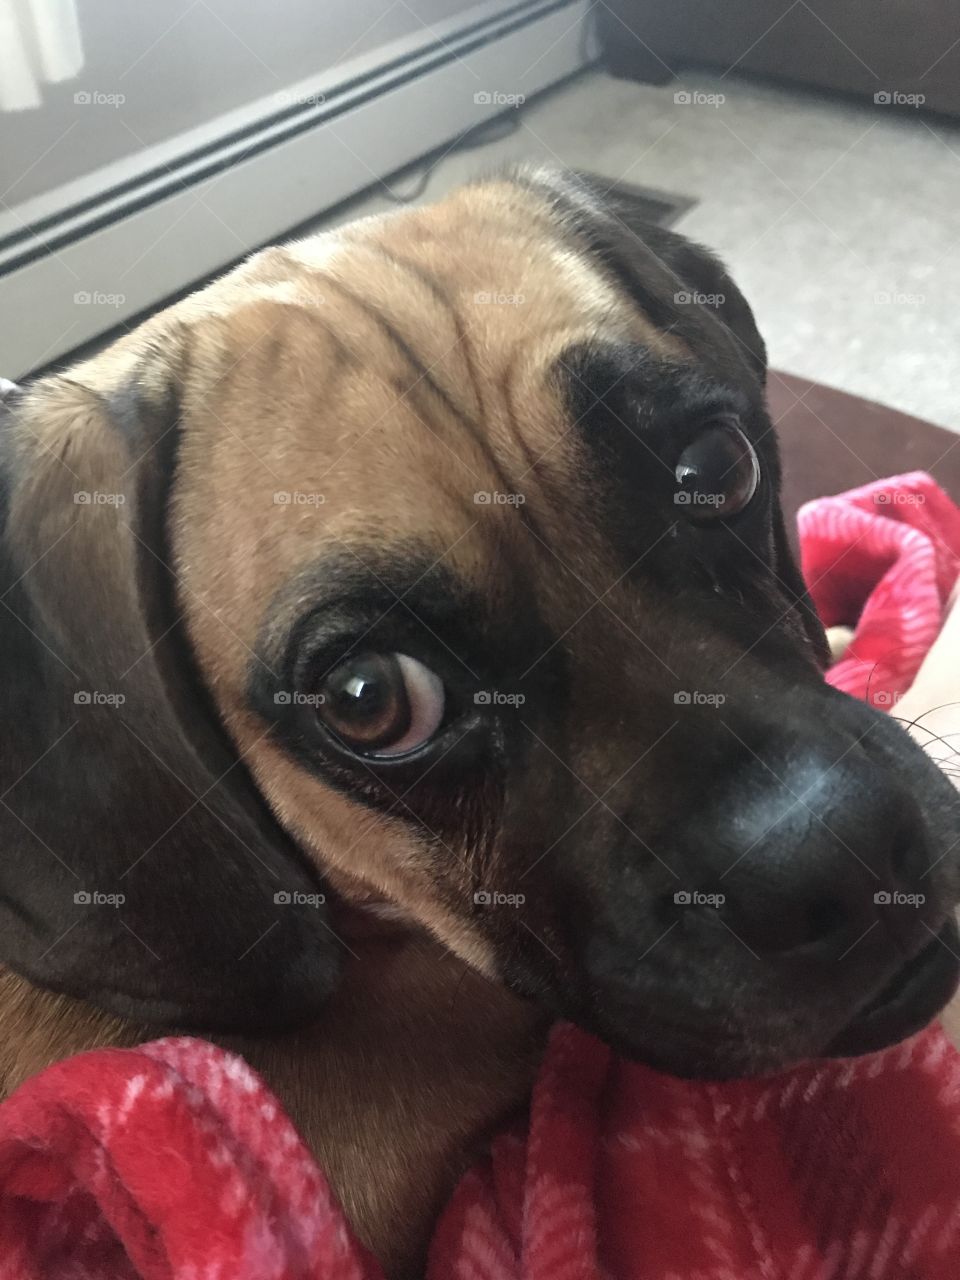 Chewy the puggle looking at me